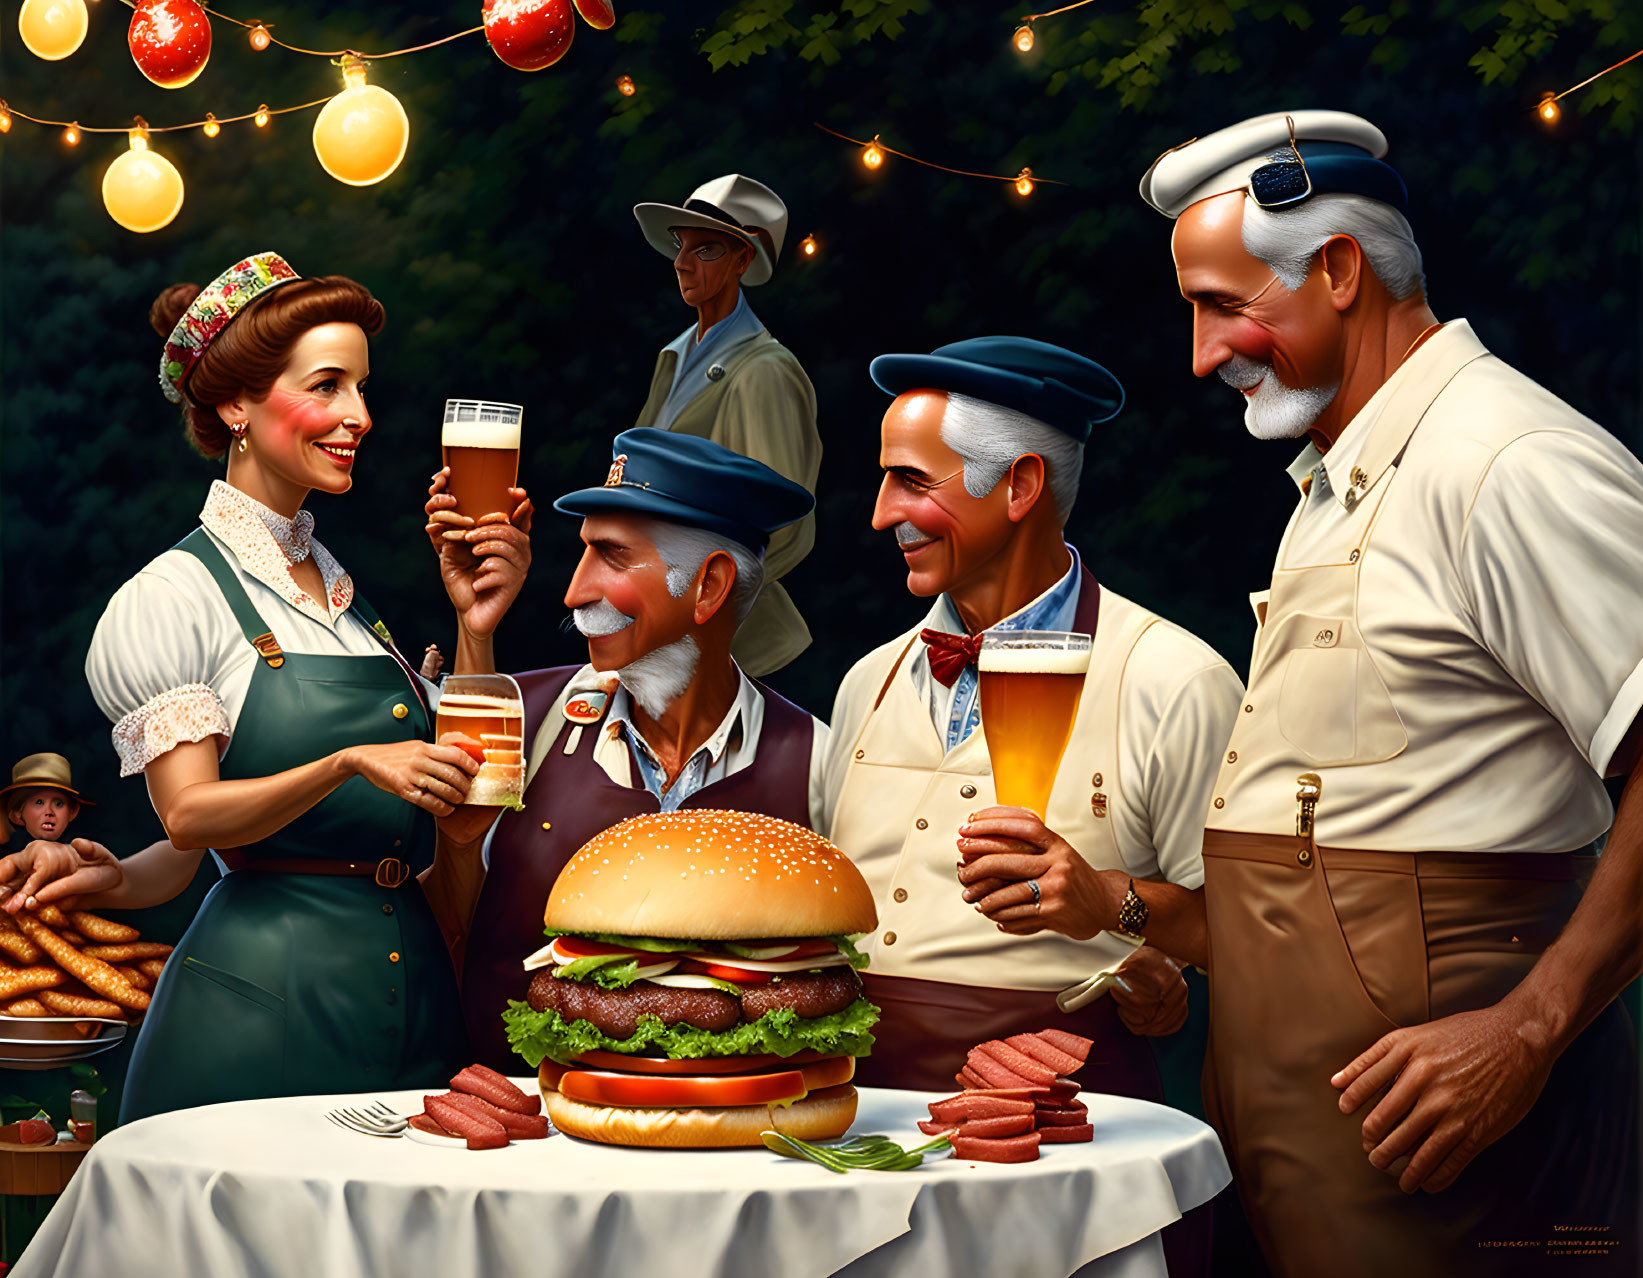 Vintage-inspired illustration of people enjoying a burger with festive lights and a child in the scene